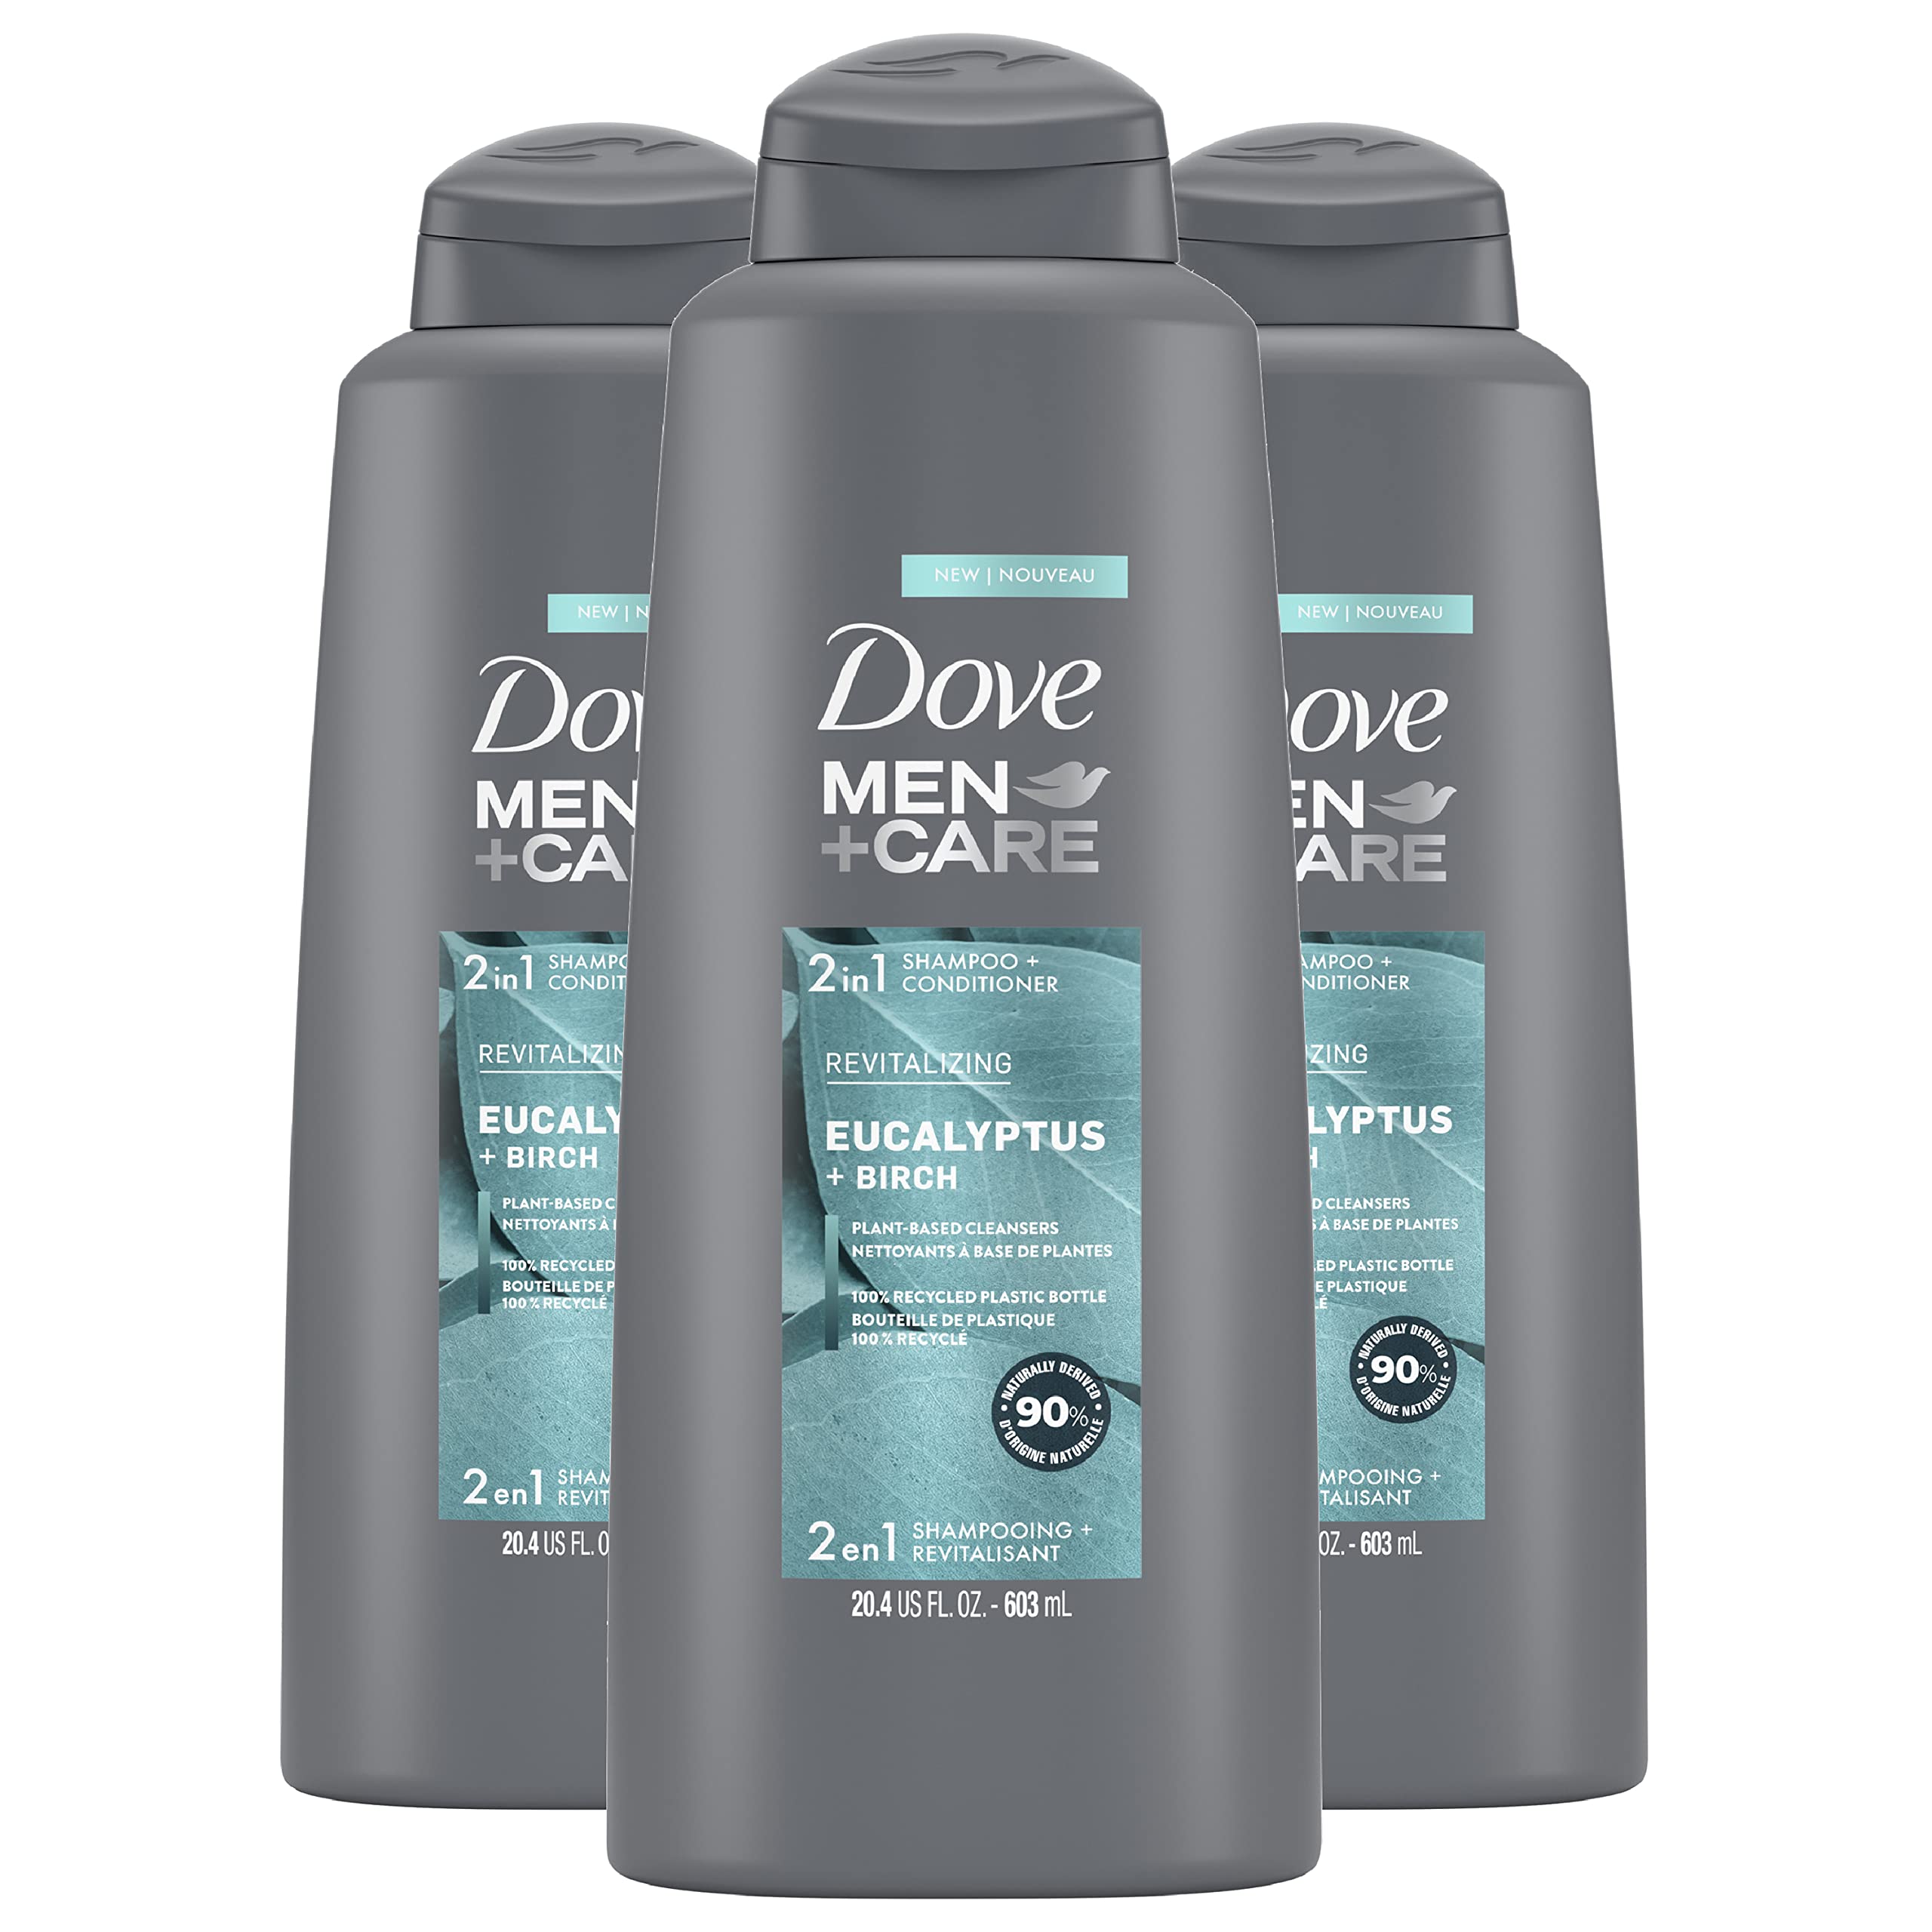 DOVE MEN + CARE 2 in 1 Shampoo Conditioner For Healthy-Looking Hair Eucalyptus + Birch Naturally Derived Plant Based Cleansers, 20.4 Fl Oz (Pack of 3)